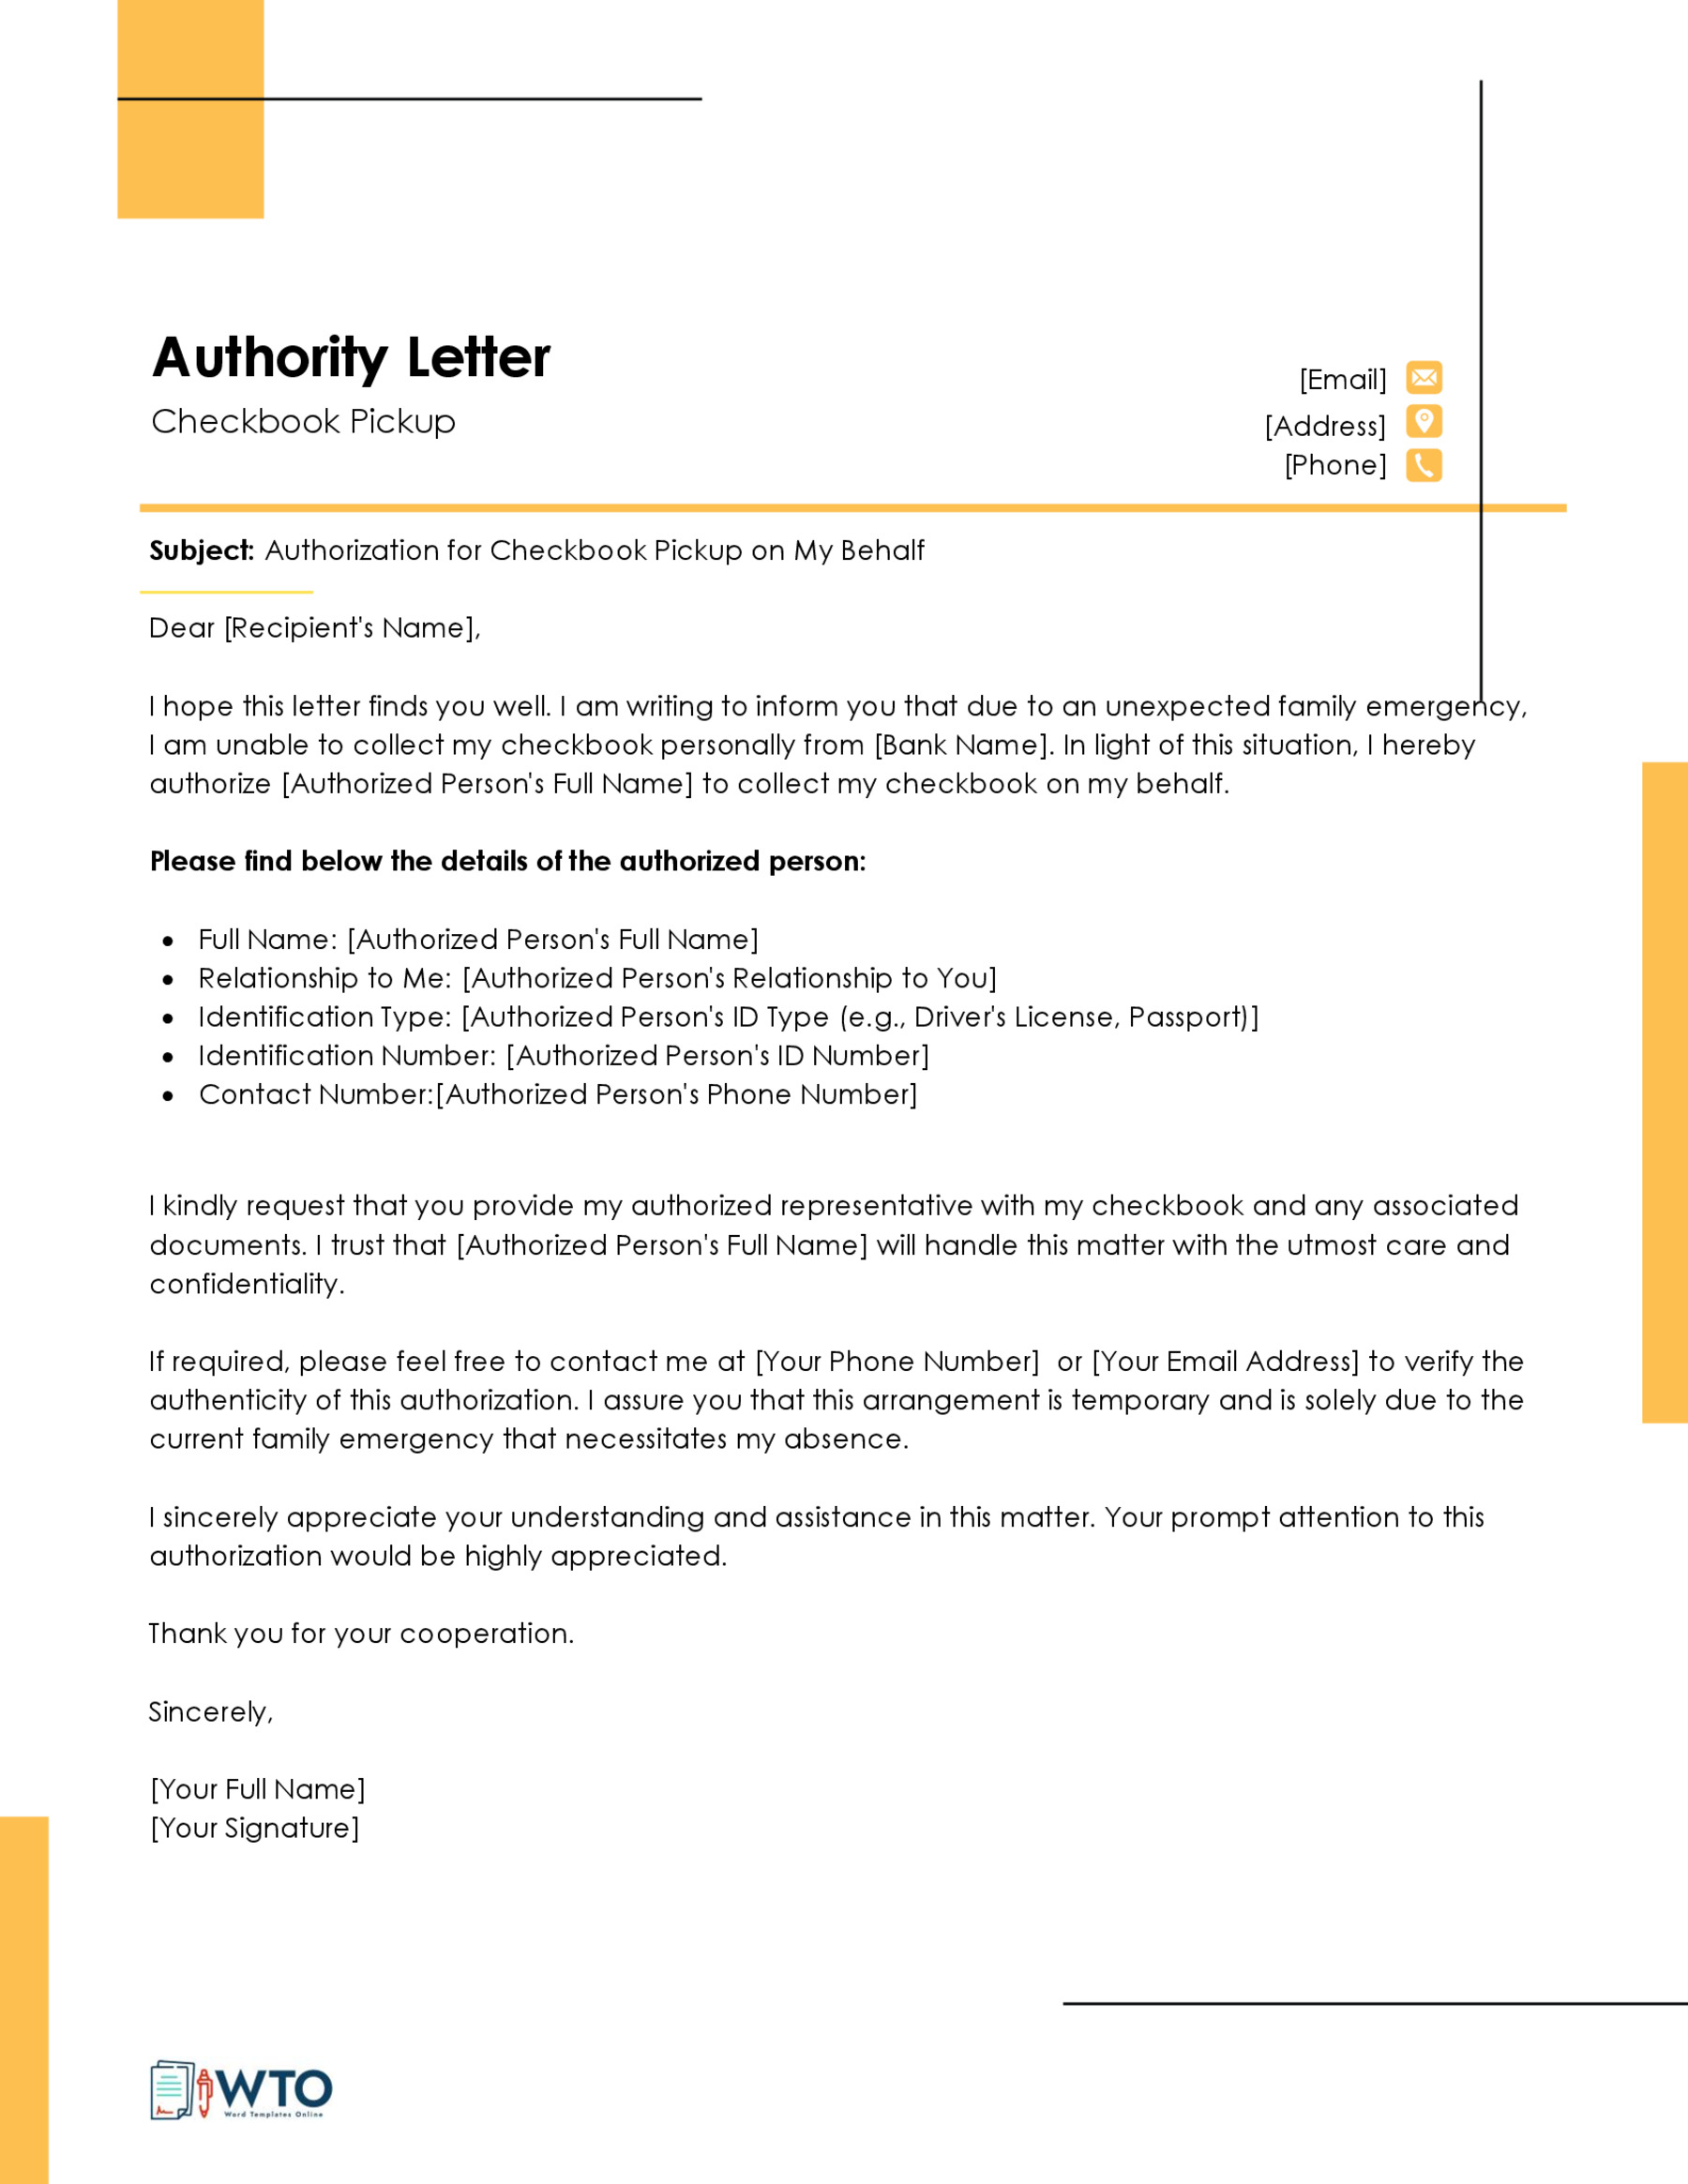 Writing an Authorization Letter for Checkbook Pickup Template-Word Format